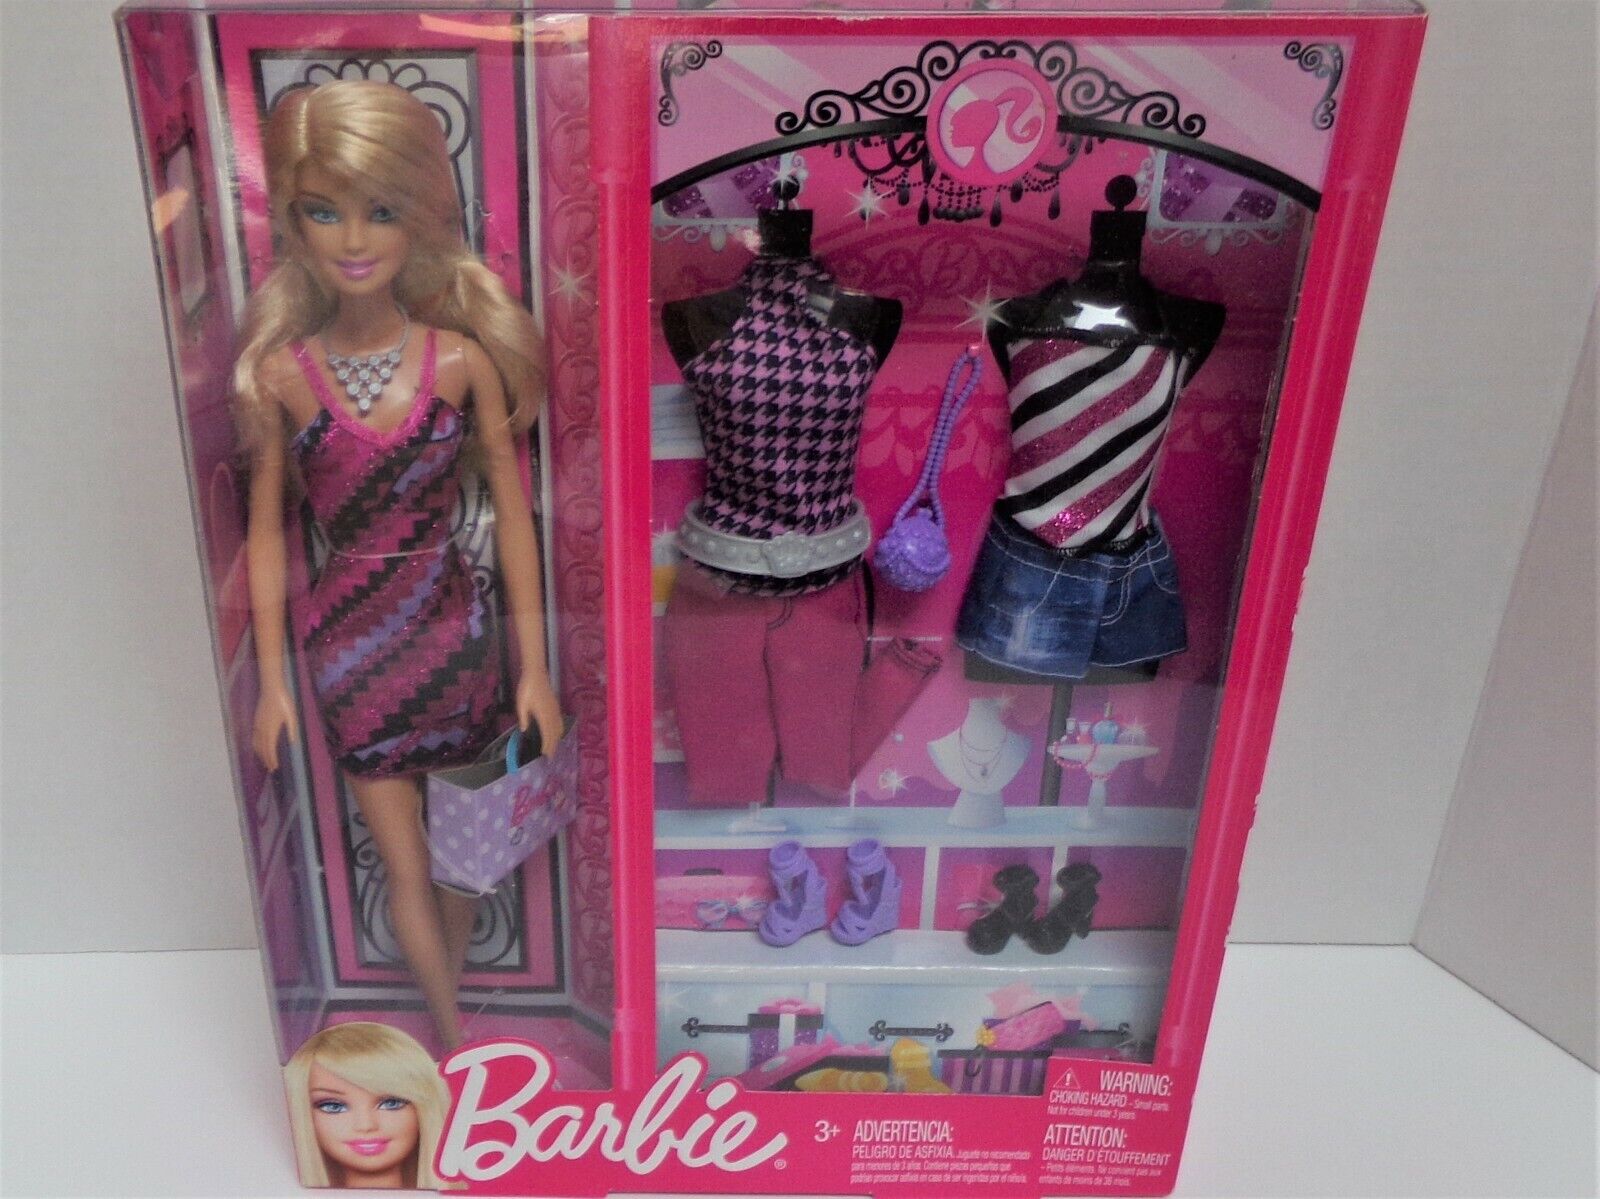 BARBIE DOLL FASHION BLOND HAIR TERESA 【オンライン限定商品】 配送員設置送料無料 COOL OUTFIITS 3 GIFT SET